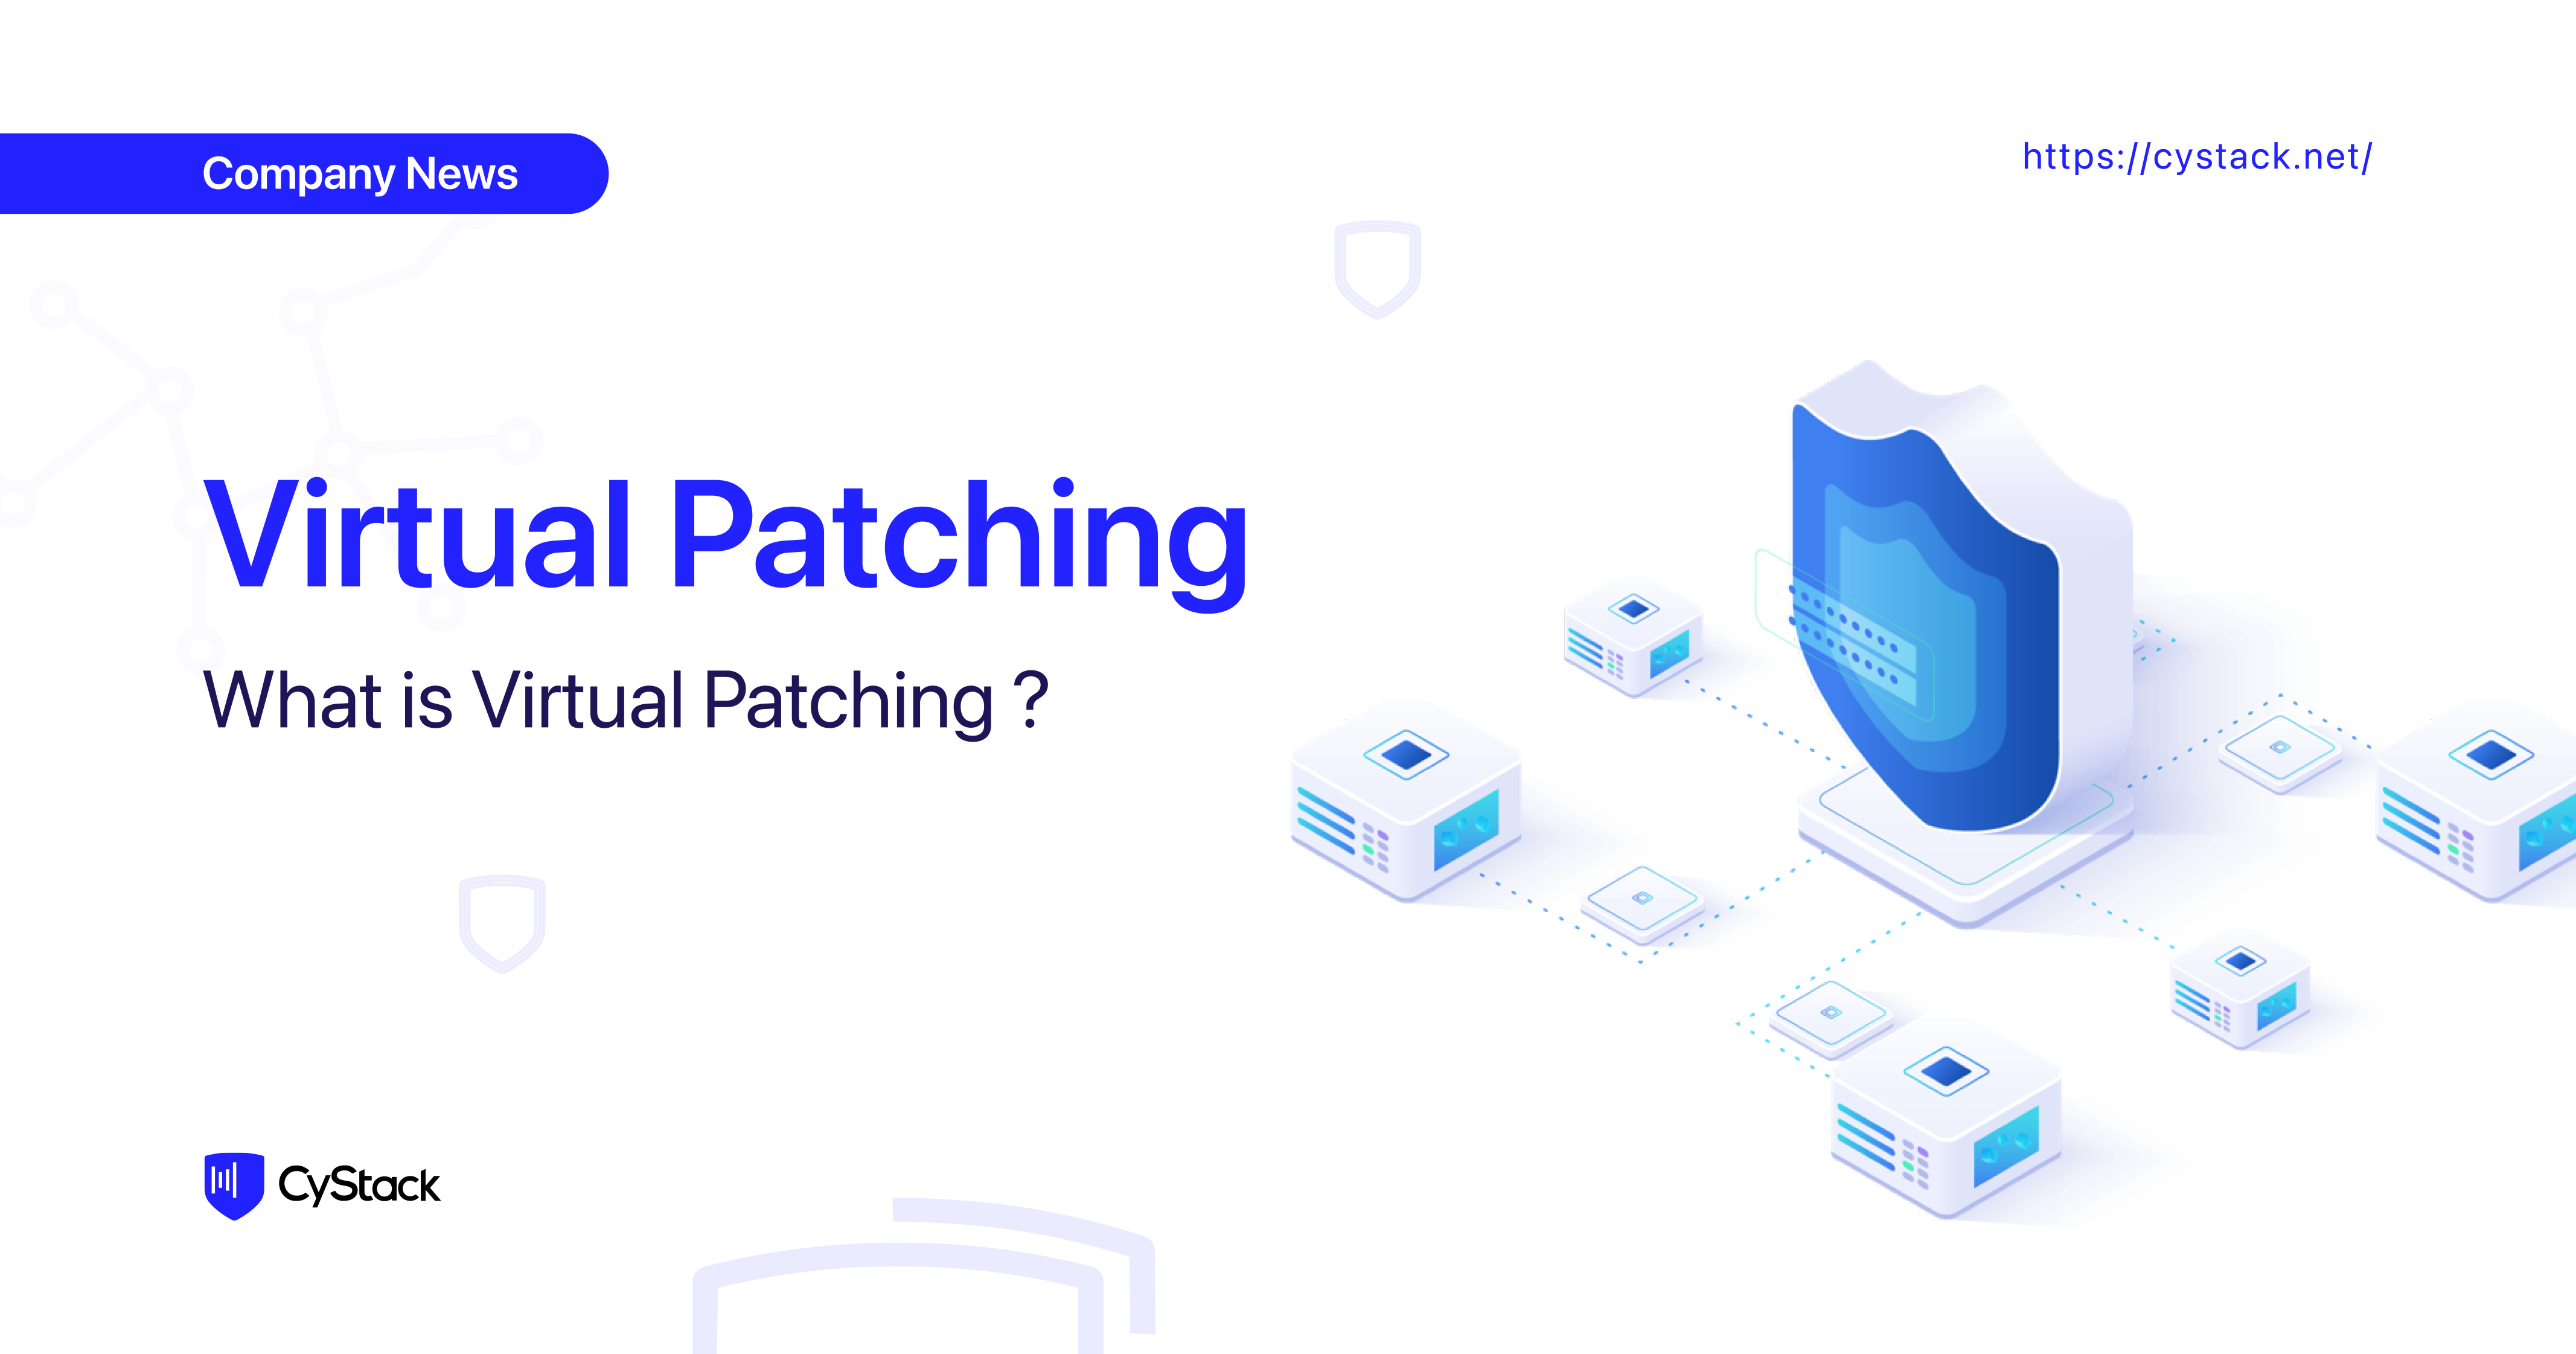 Why is virtual patching important?